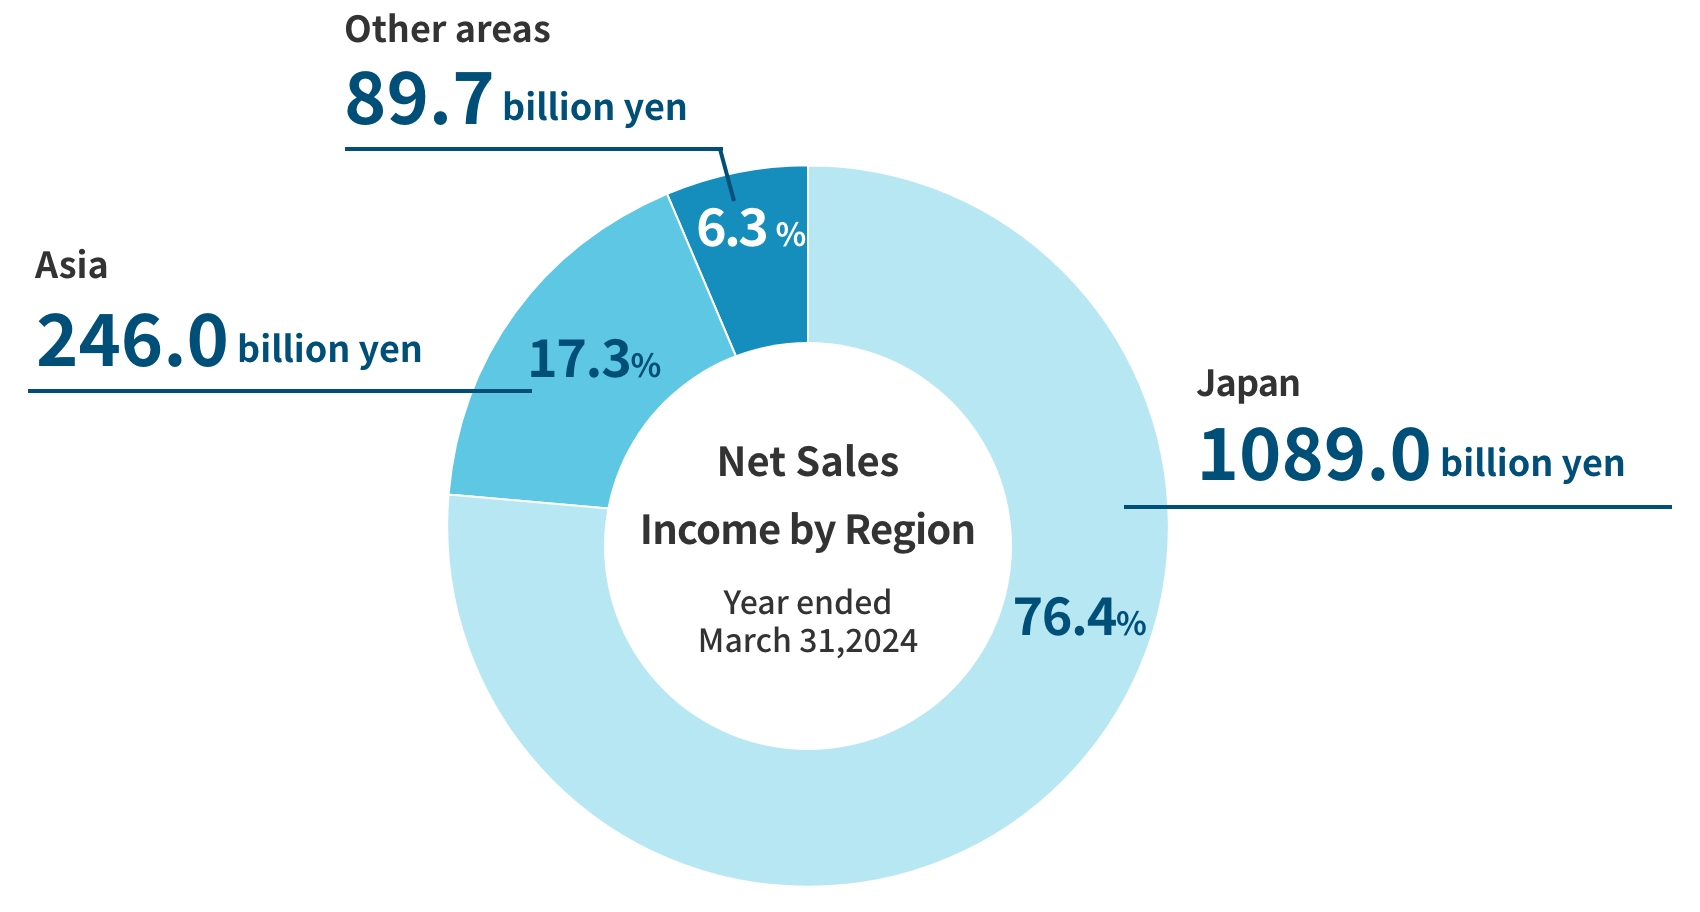 Pie chart showing net sales income by region for fiscal year ended March 2024. Japan account for 76.4% of total sales at 1,089.0 billion yen, Asia account for 17.3% at 246.0 billion yen, and other areas account for 6.3% at 89.7 billion yen.